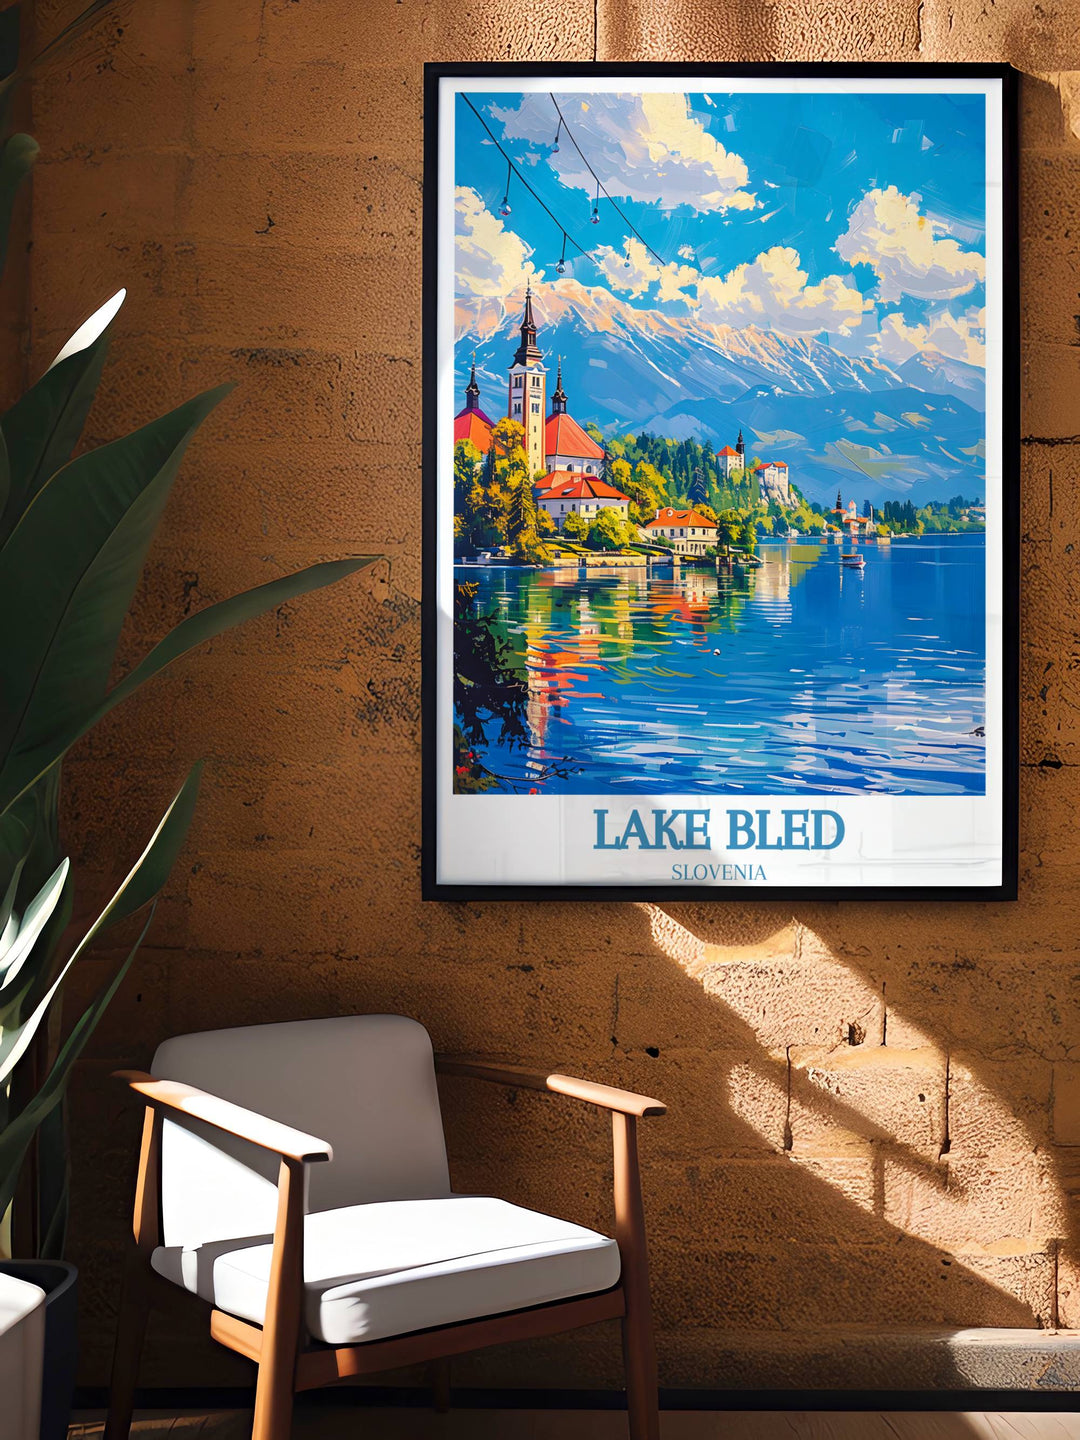 Breathtaking aerial view of Lake Bled and its surroundings in a Lake Bled Print, great for lovers of stunning landscapes who want to immerse themselves in the panoramic beauty and majestic setting of this iconic Slovenian location